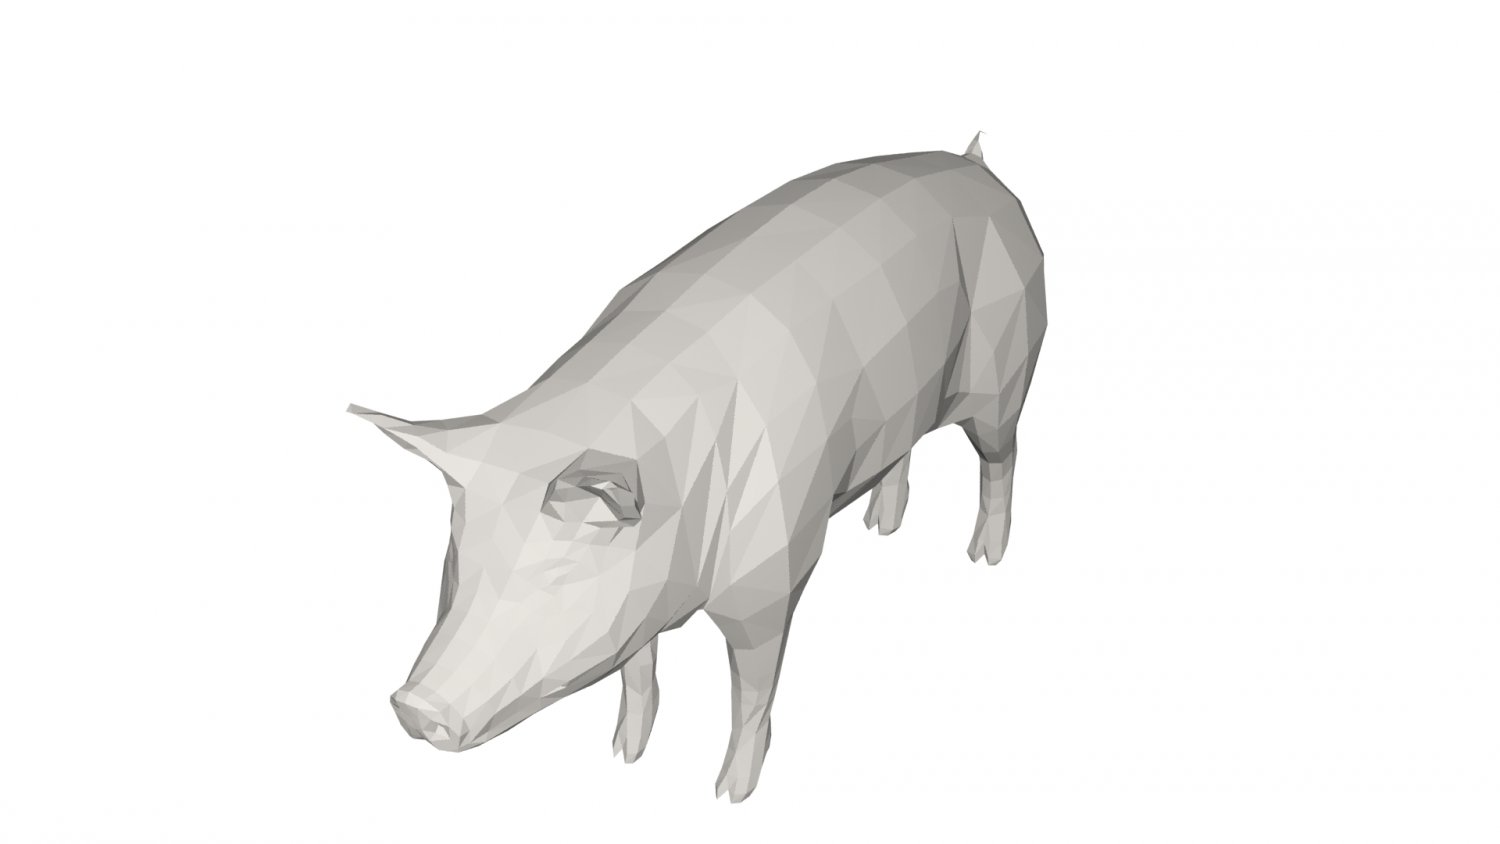 motorcycle cruiser clipart black and white pig